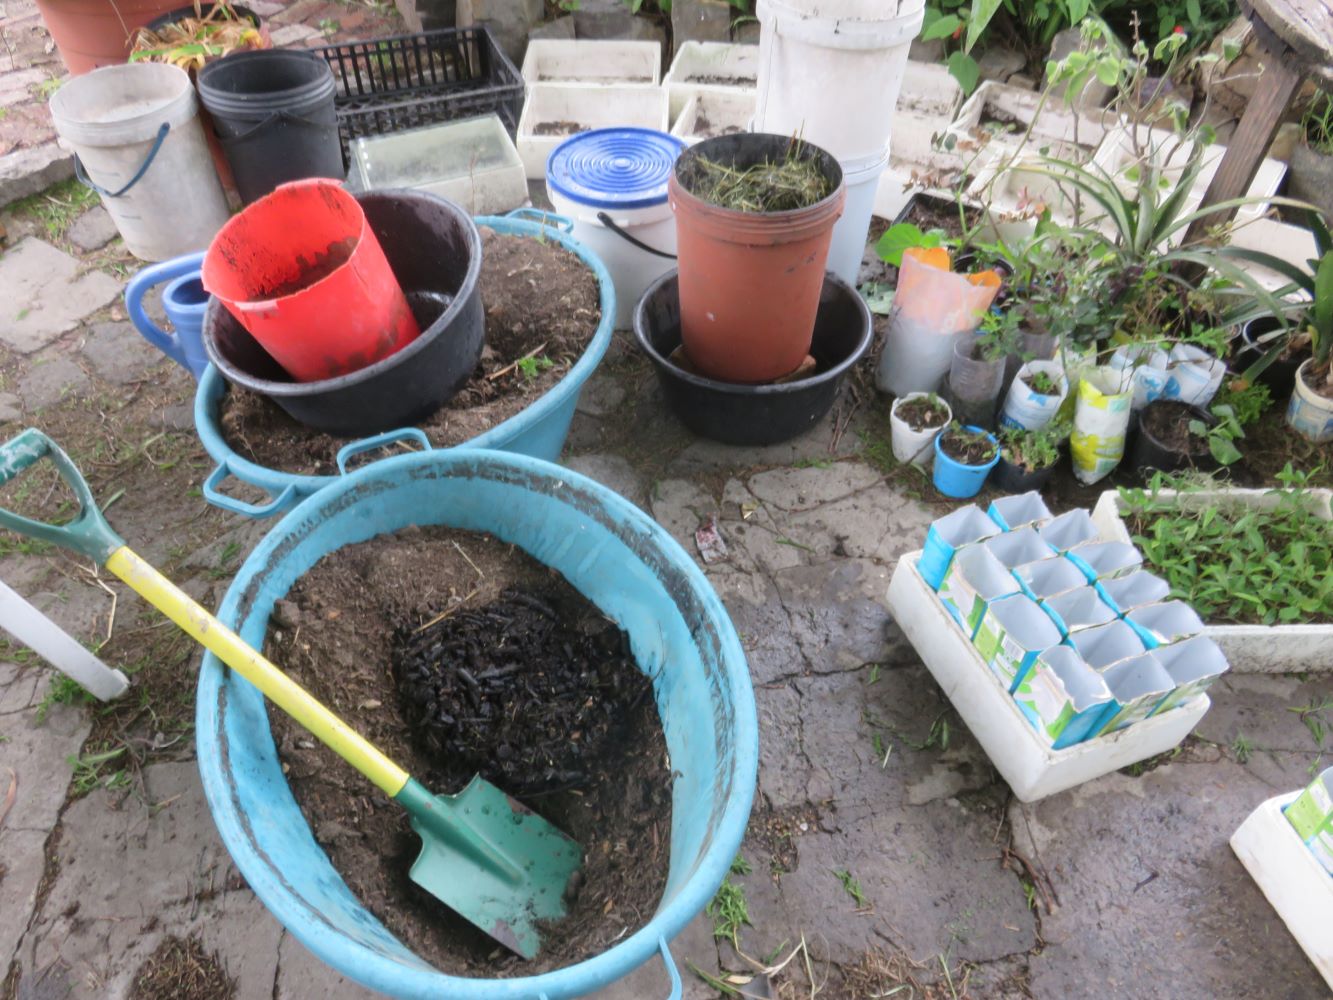 Potting soil, additives, planters and trays.